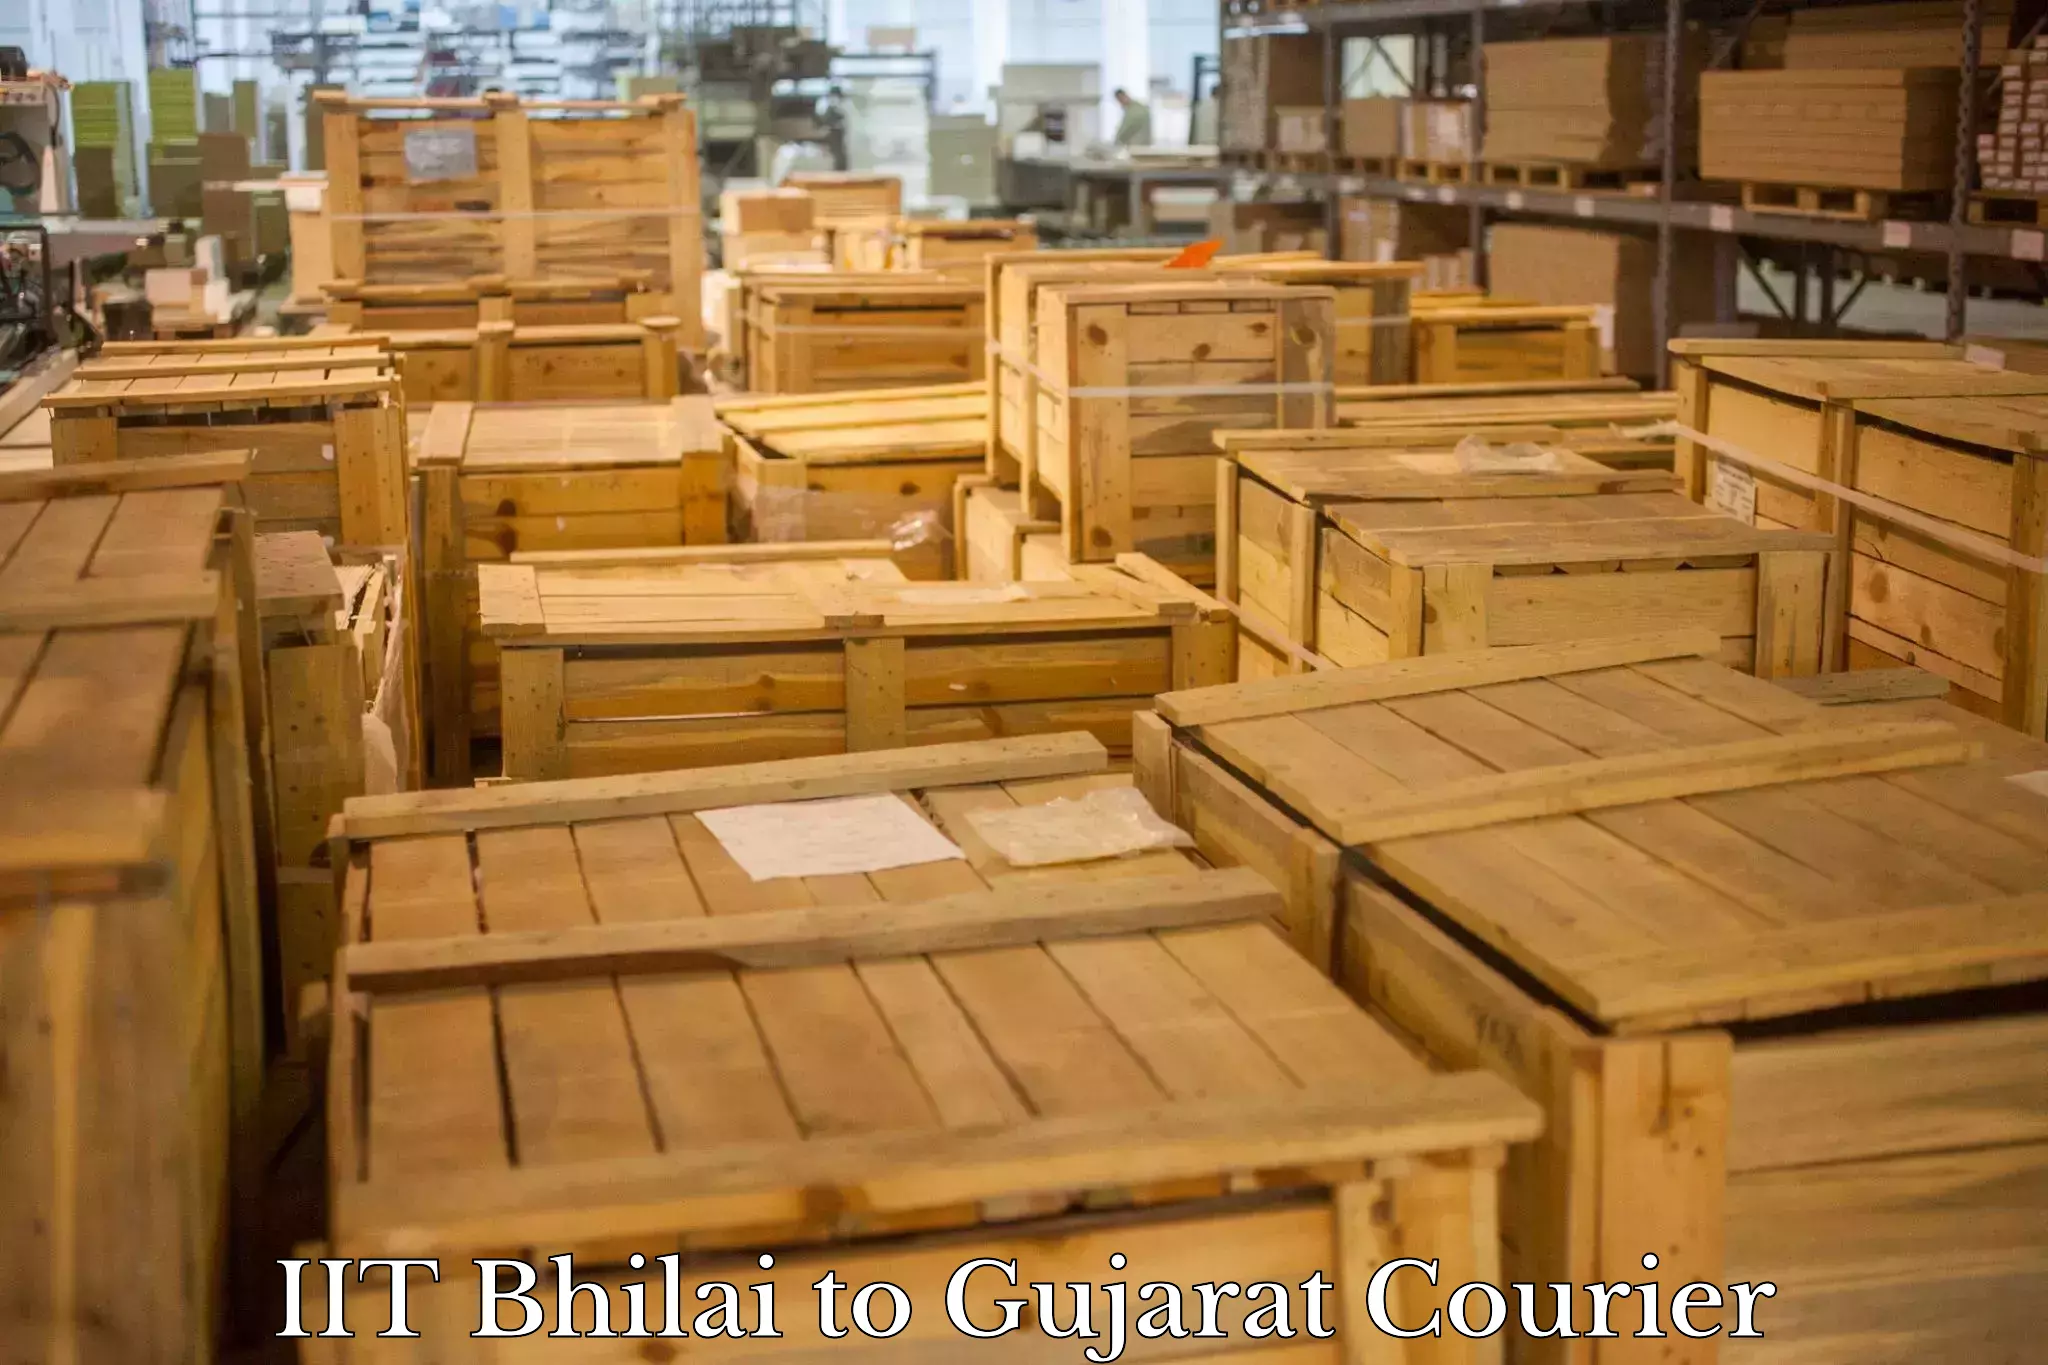 Courier services IIT Bhilai to Mehsana